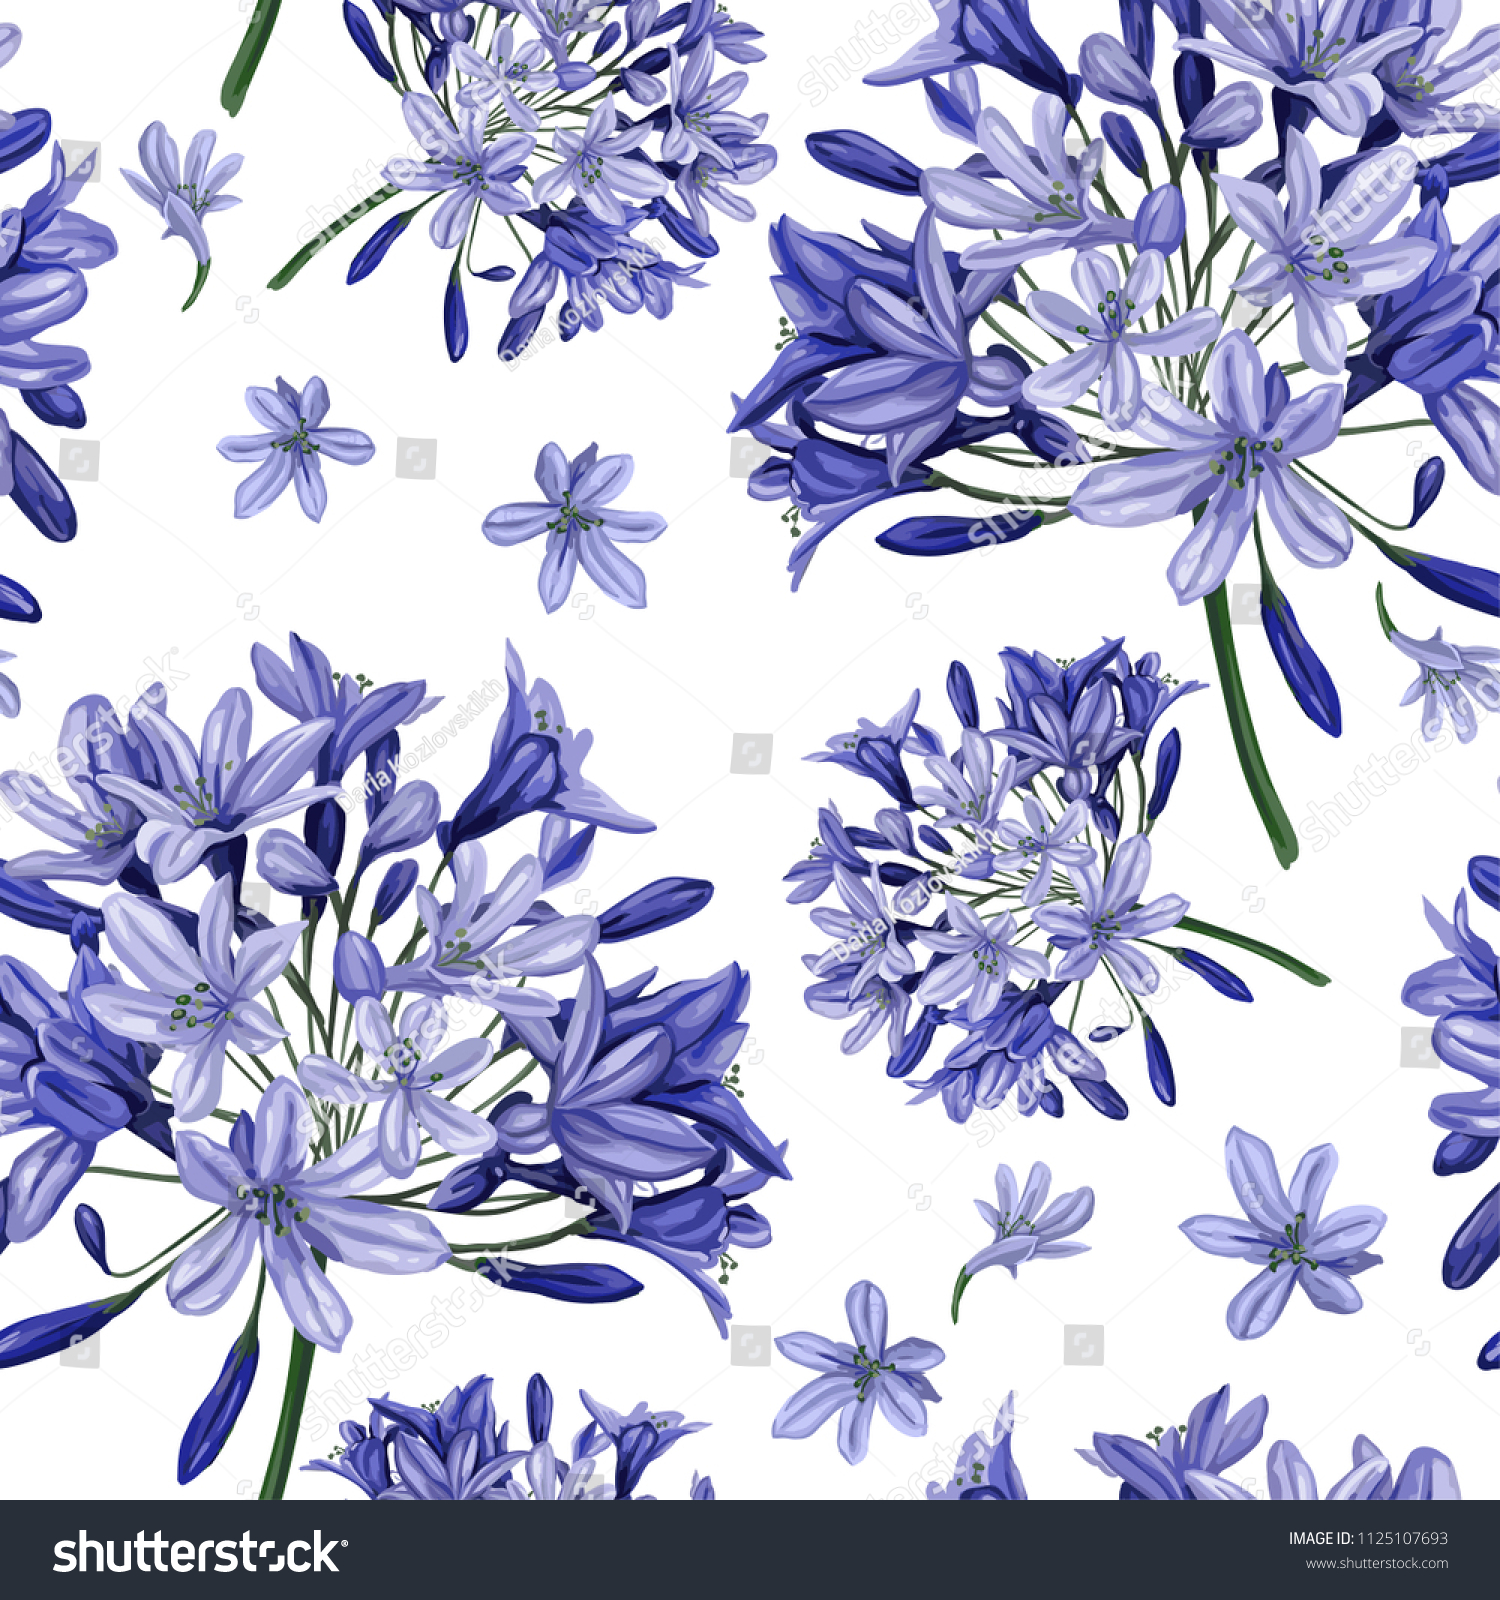 SVG of Seamless pattern. Blue agapanthus flower pattern. This pattern can be used for printing on textiles, wallpaper and other surfaces. svg